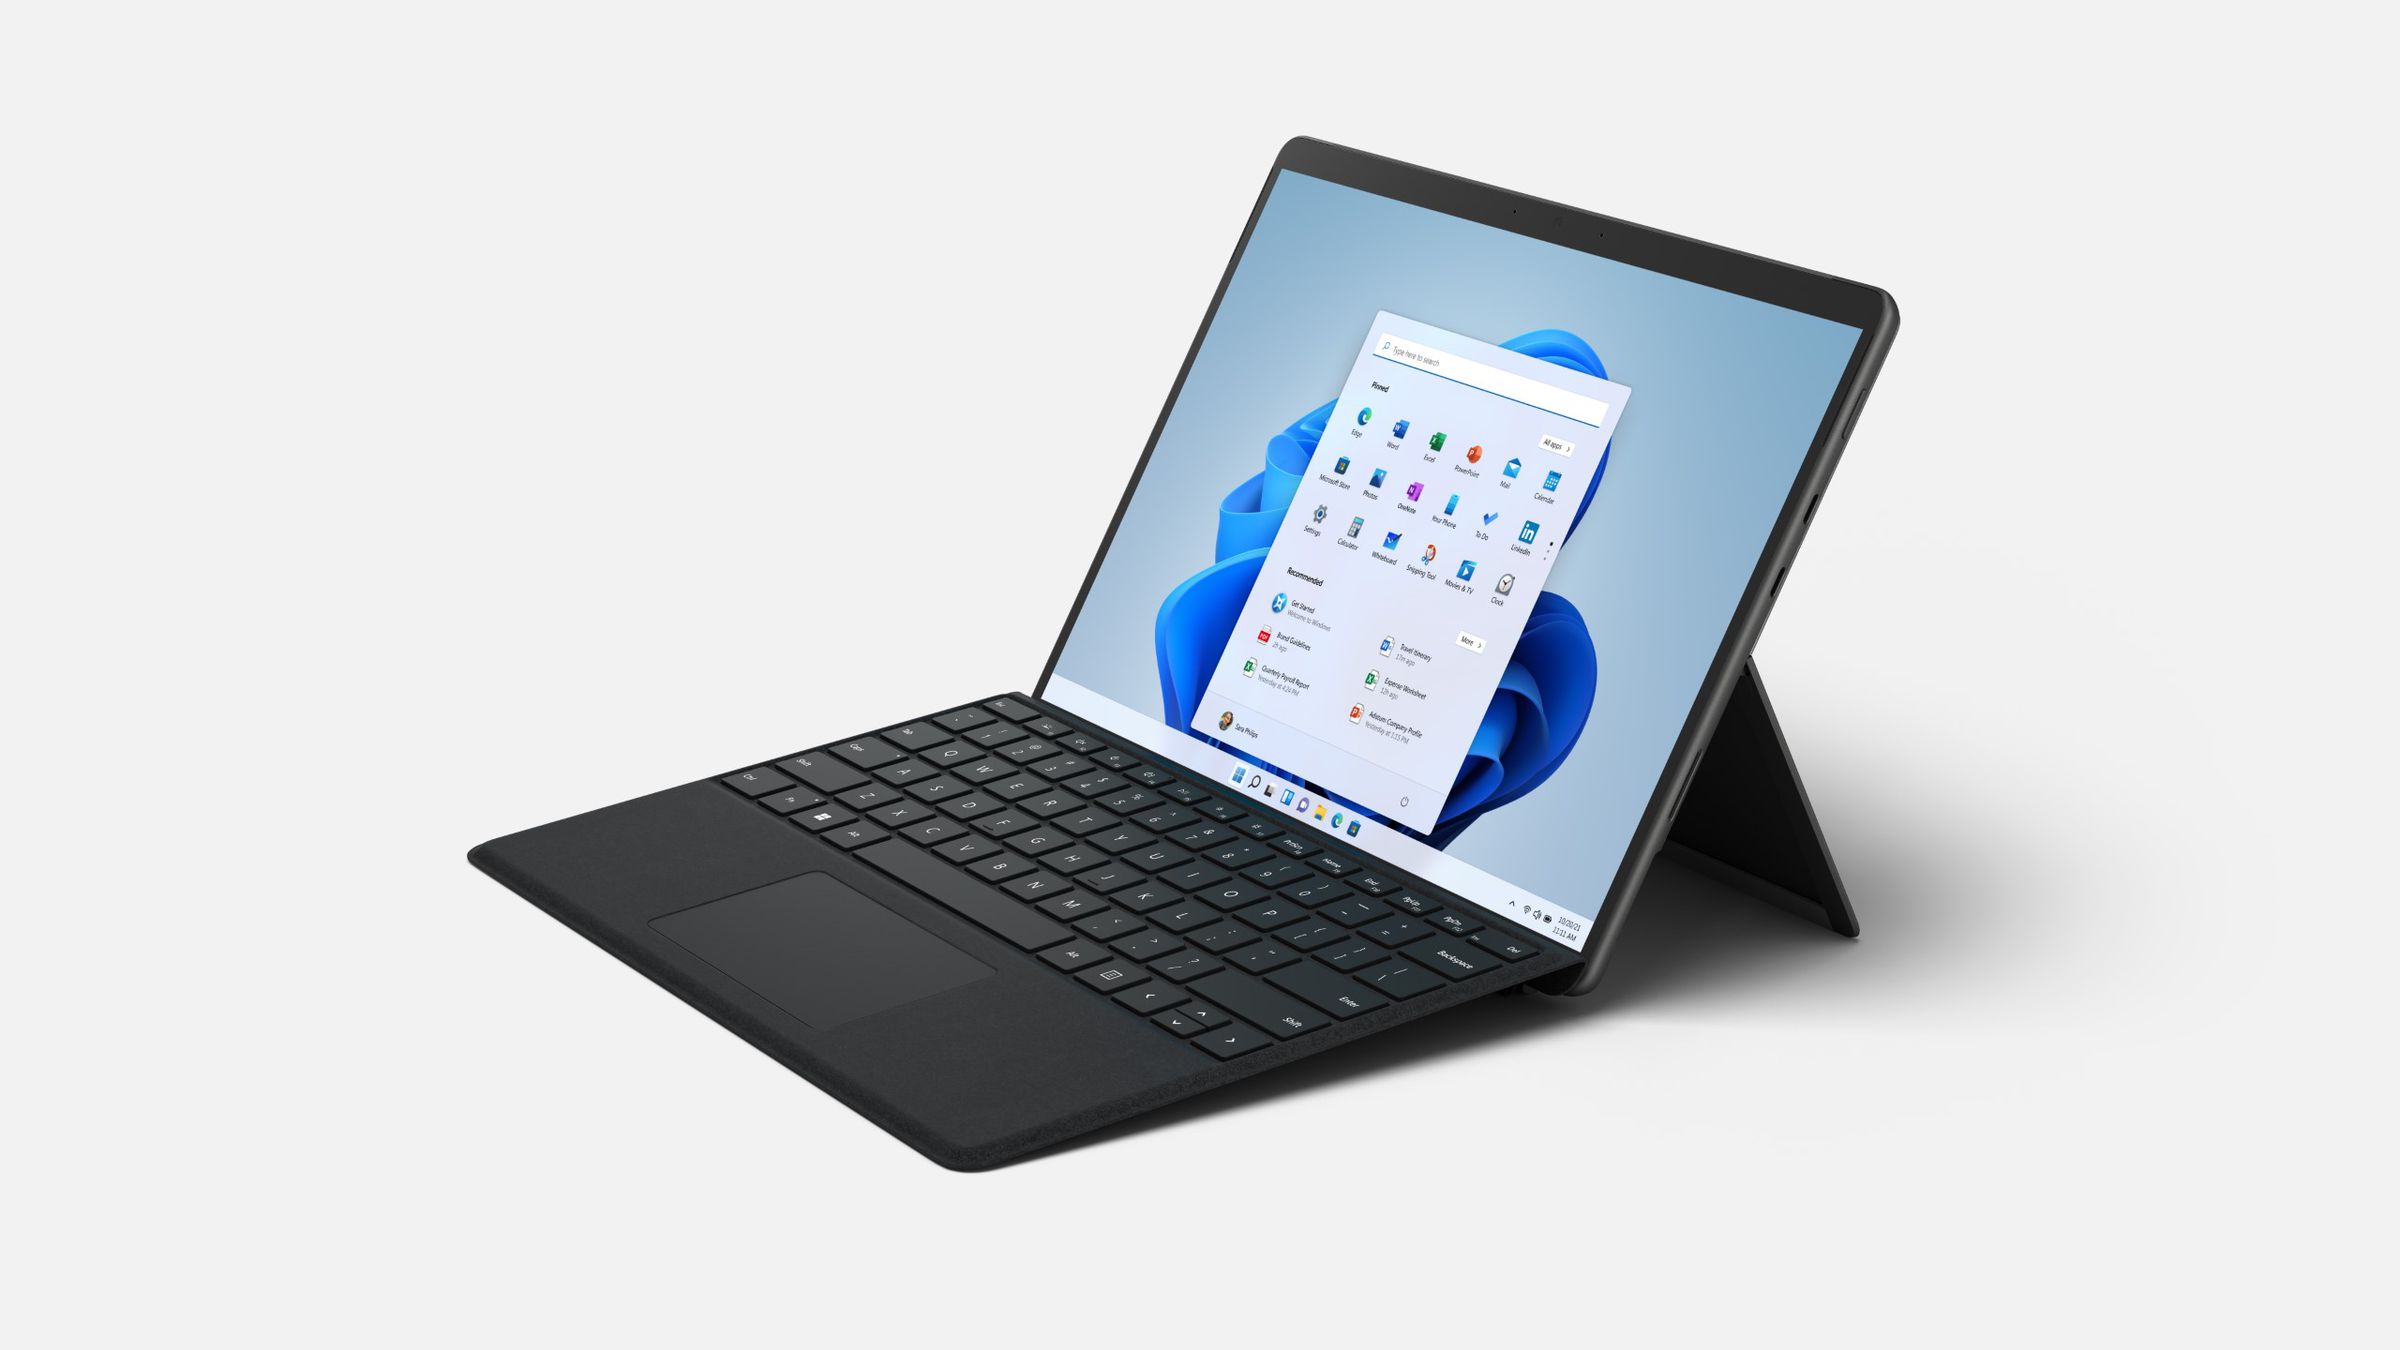 The Surface Pro 8 has a larger 13-inch display.